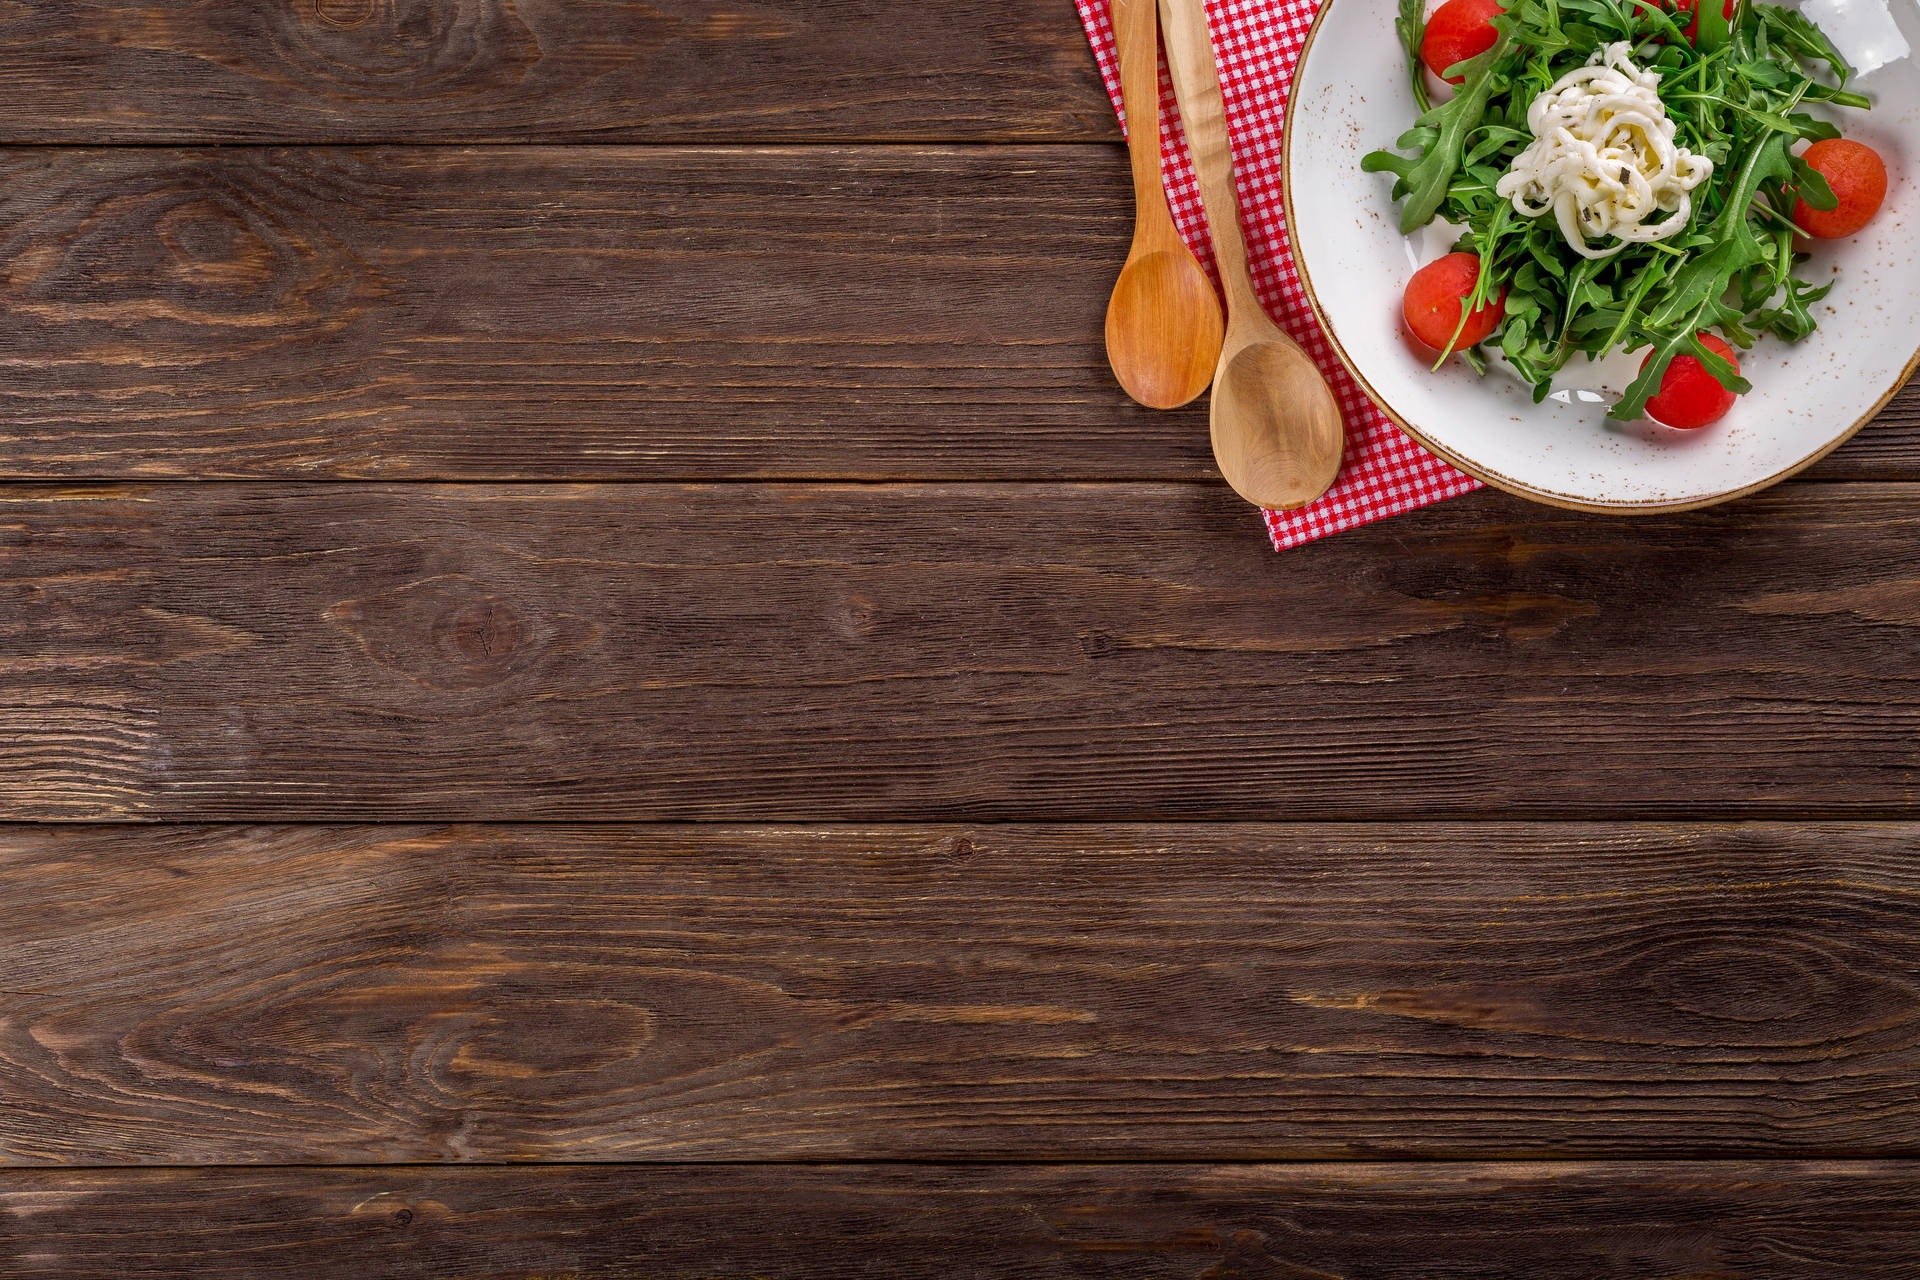 Afternoon salad cooking wallpaper.